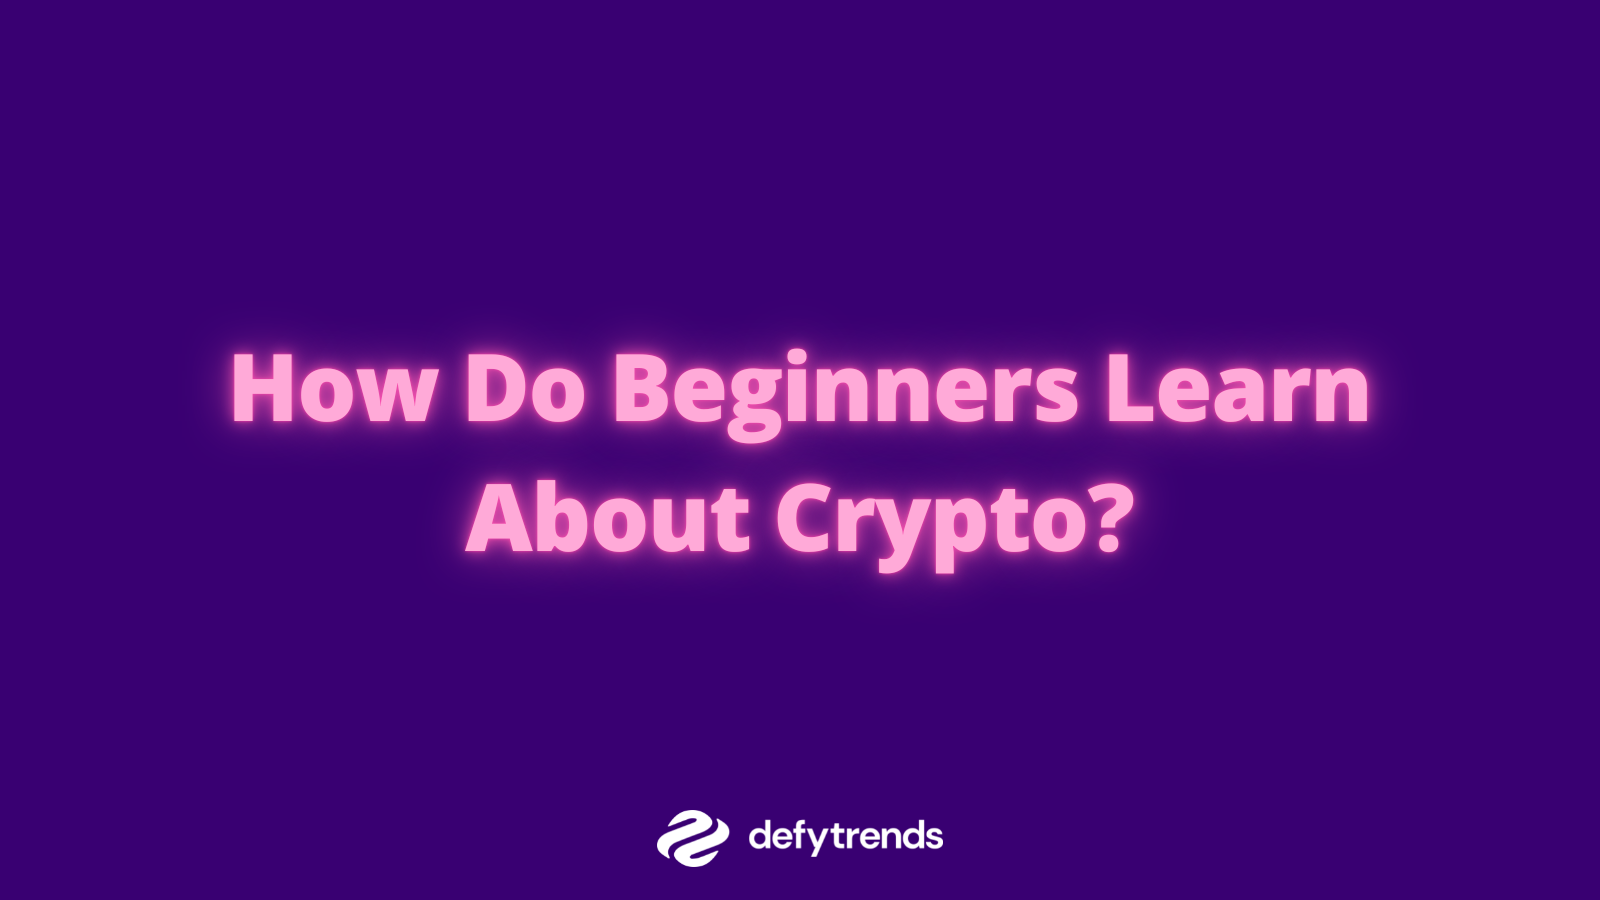 How Do Beginners Learn About Crypto?